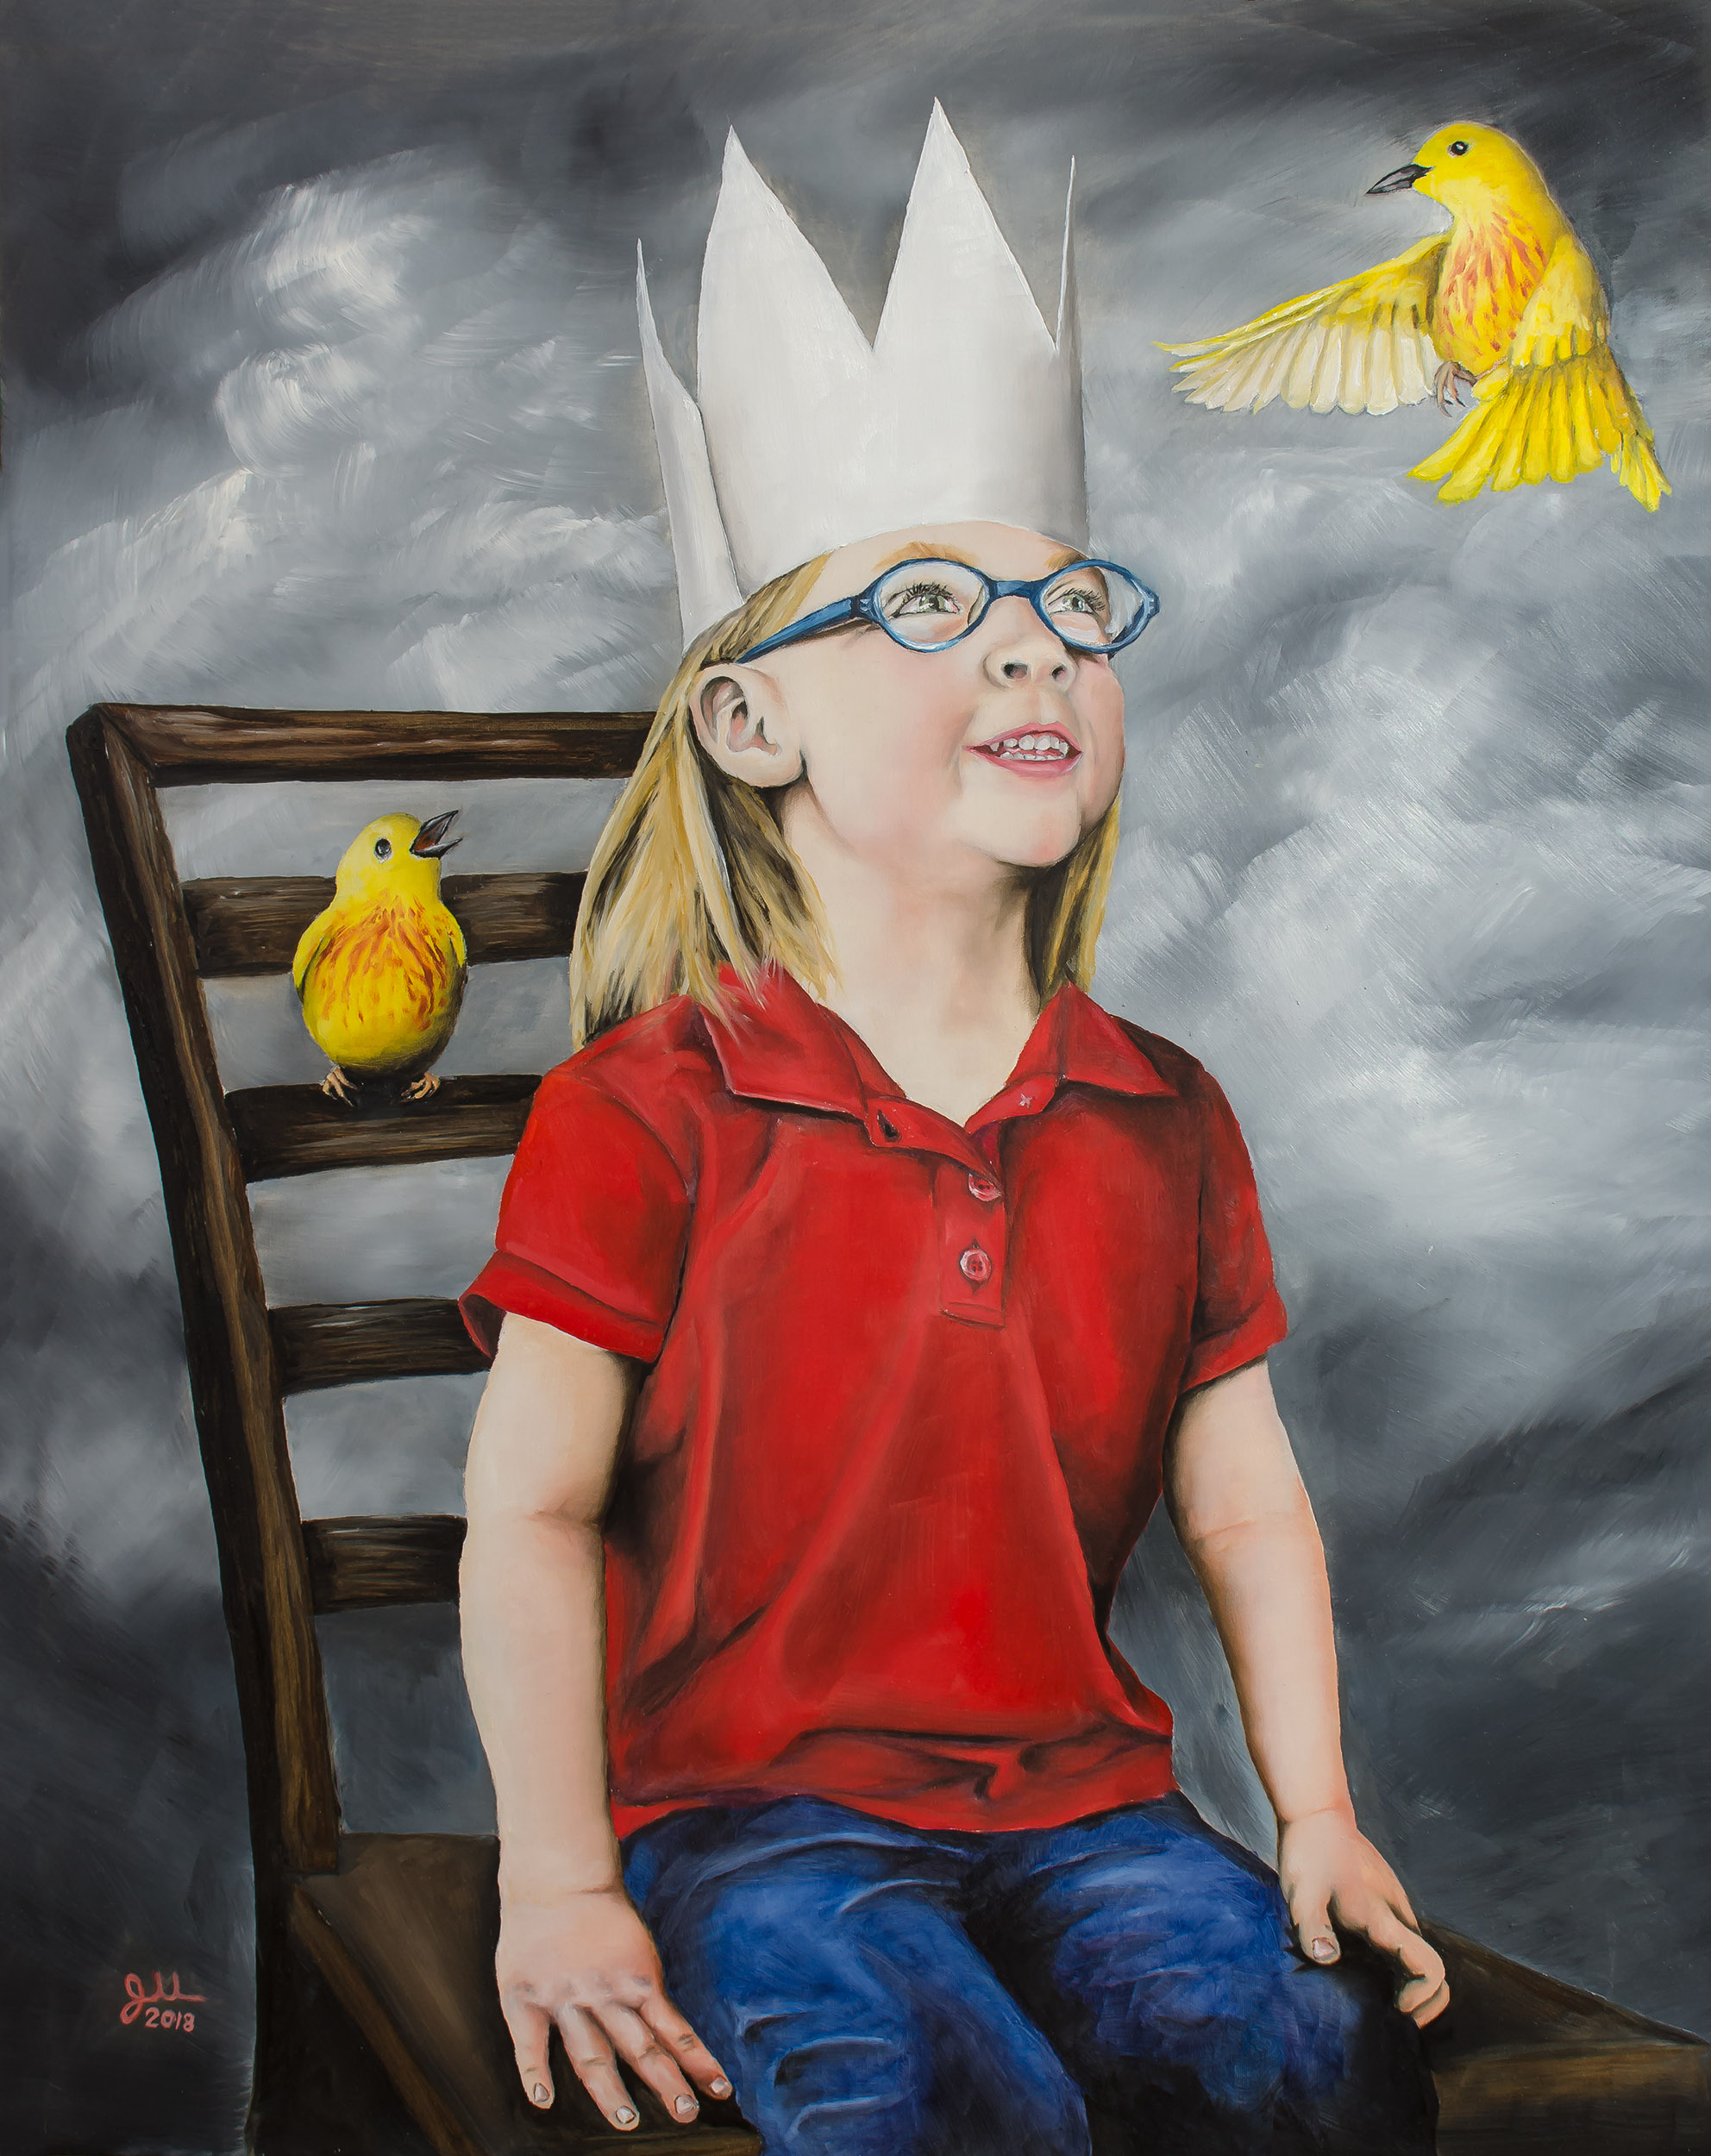   THE QUEEN   Oil on aluminum panel, 16x20”, 2018  Selection for the 2018 Annual Juried Exhibition, MacRostie Art Center, Grand Rapids, MN 